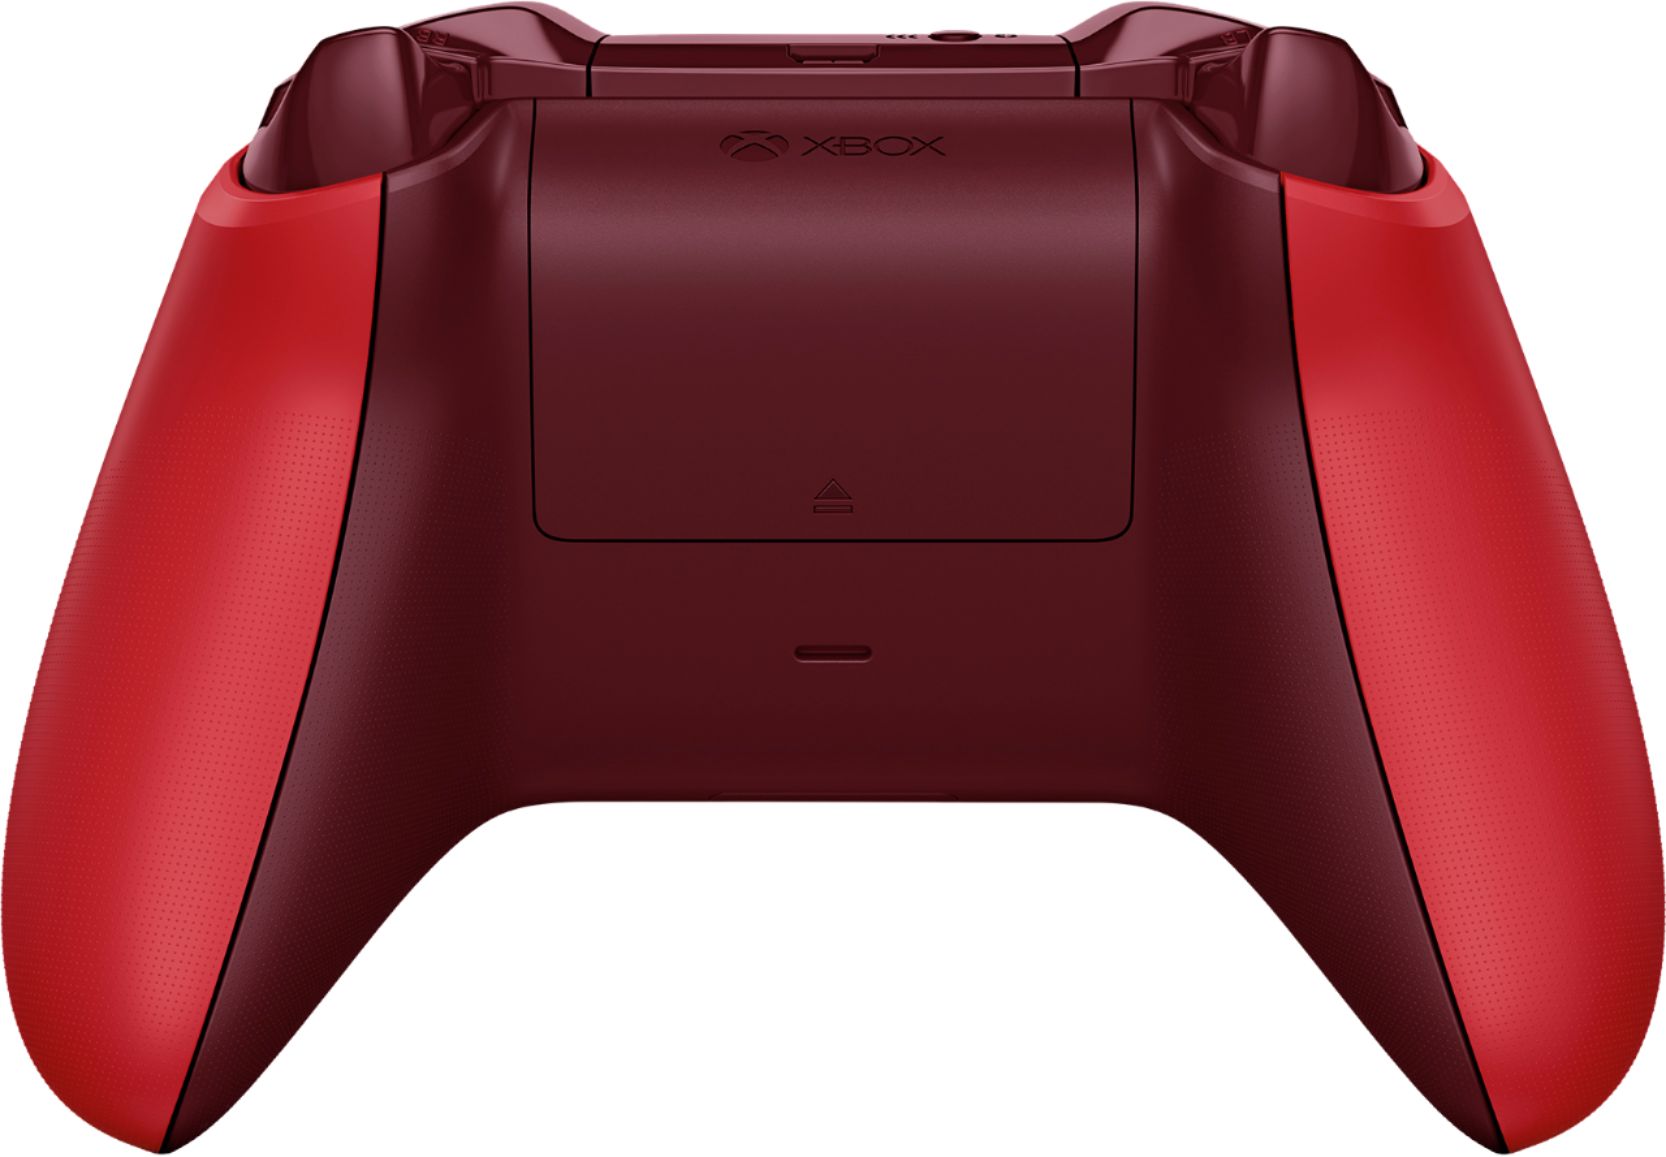 red sport xbox controller